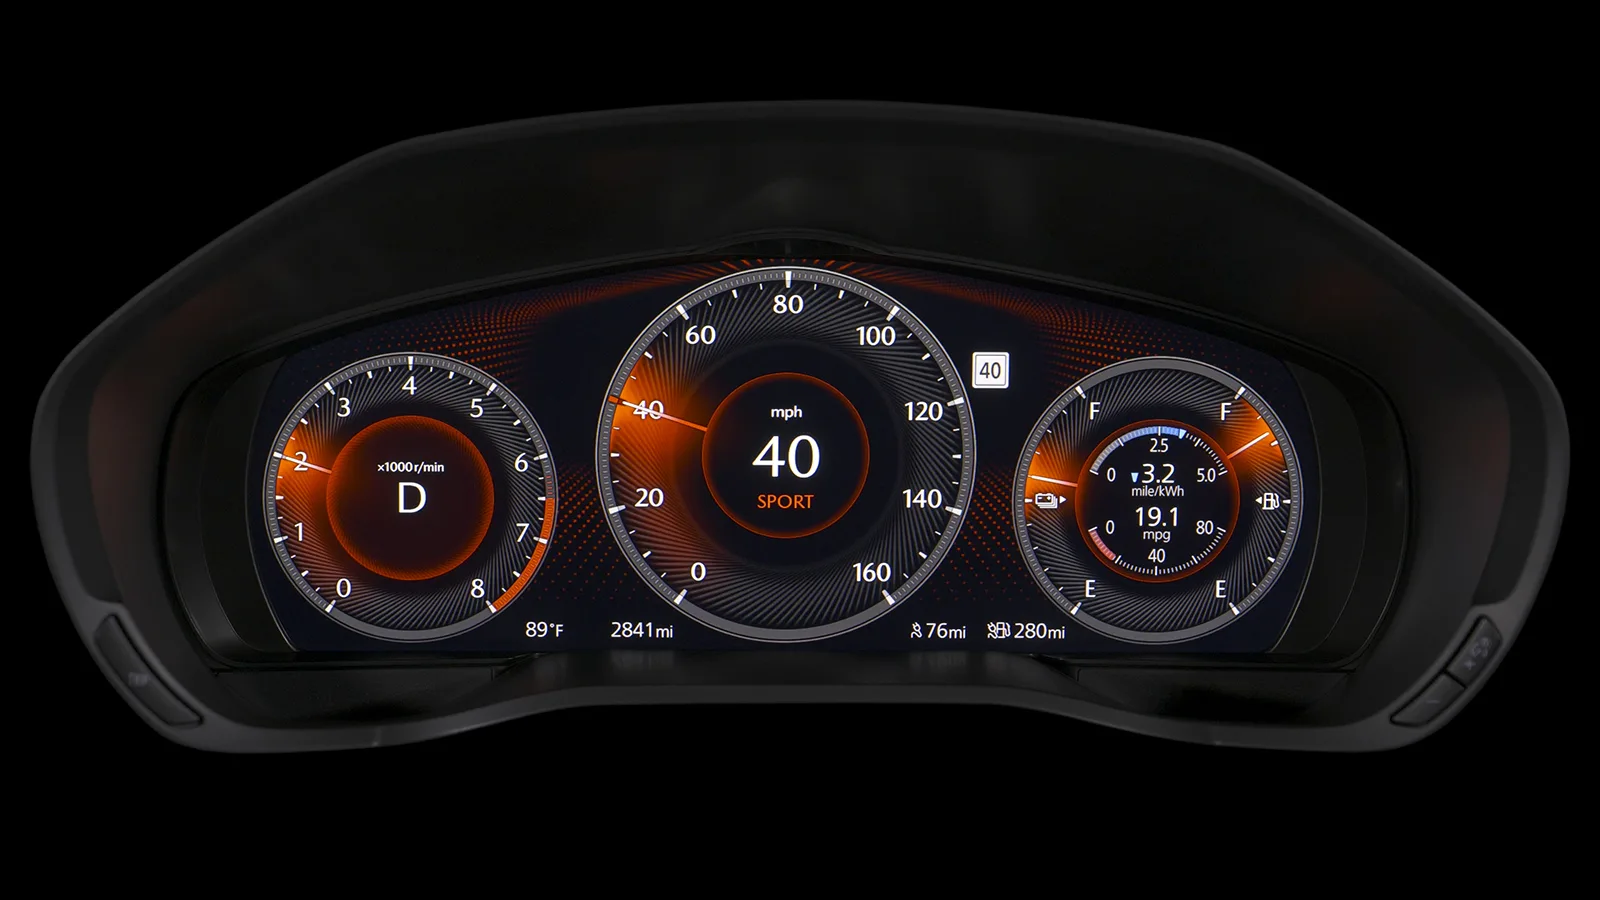 Panasonic and Mazda Launch Cutting-Edge Display Technology in the CX-70 – Featured on Display Daily